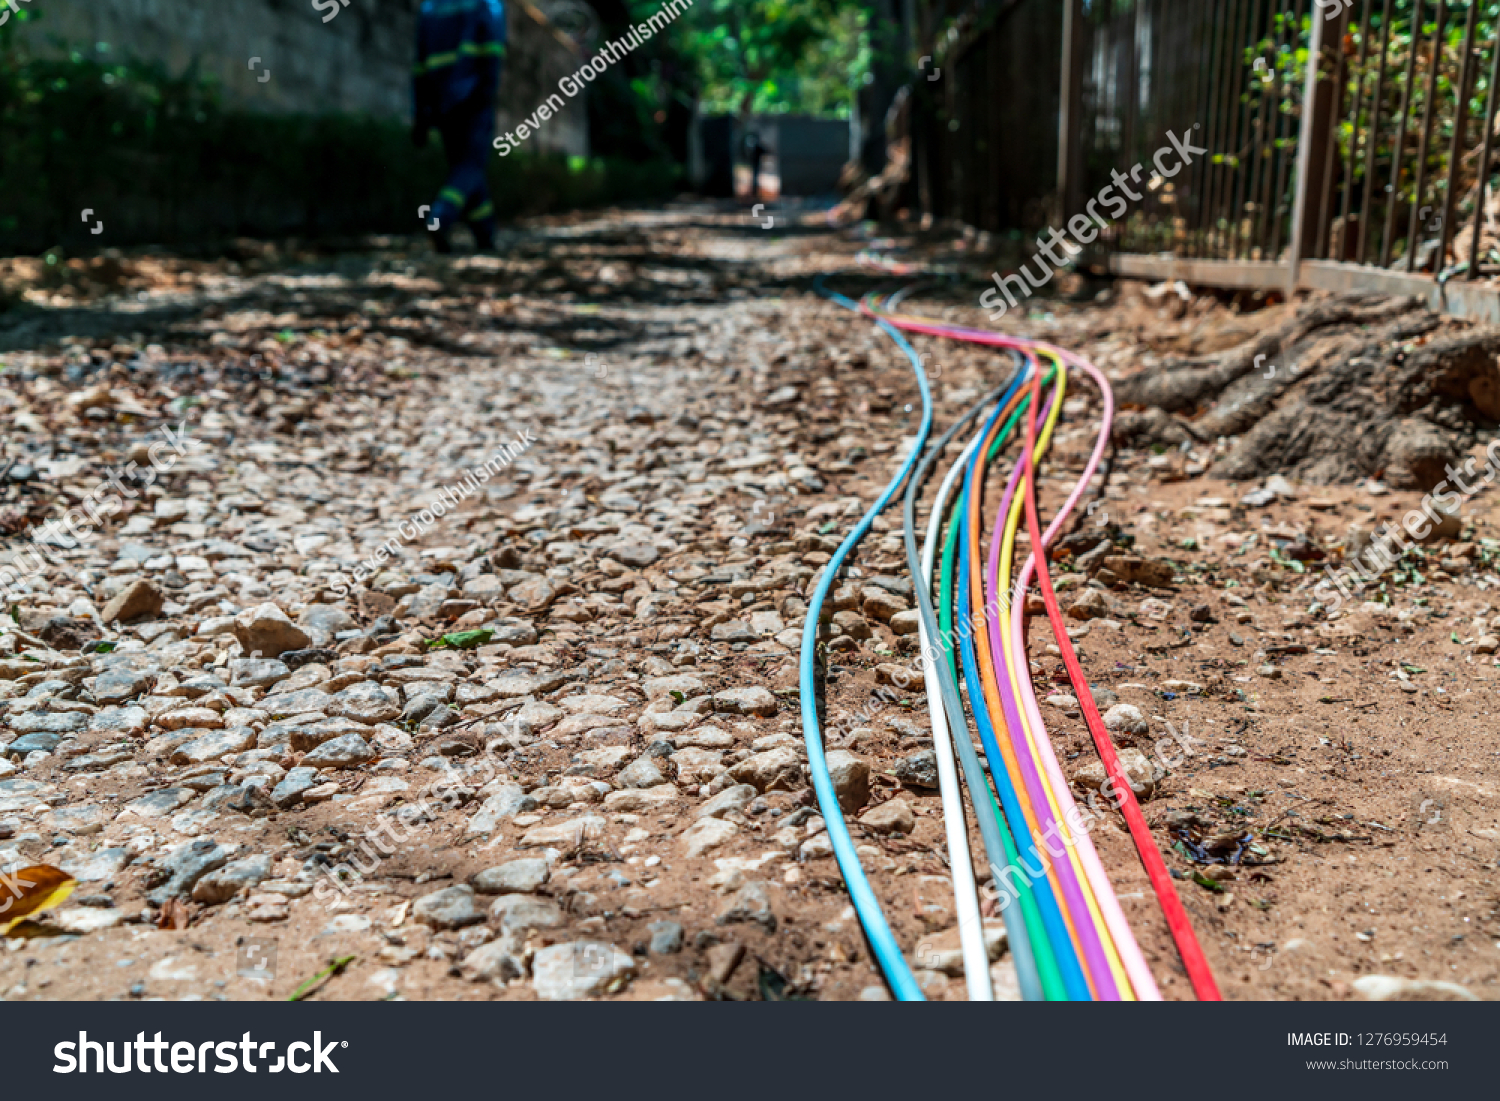 Fibre optic cables for fast internet connections in Africa #1276959454